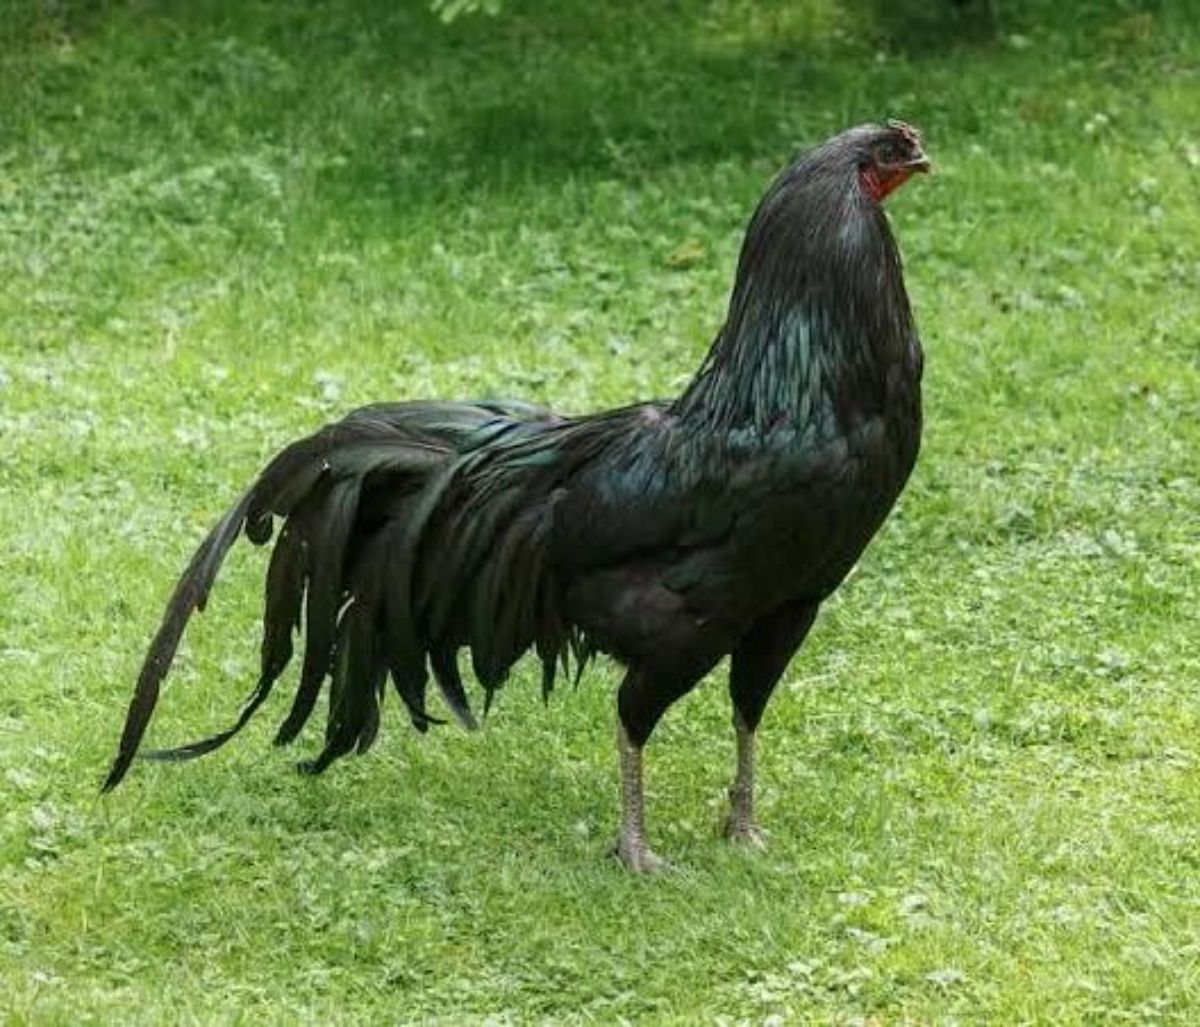 A beautiful black Sumatra rooster standing on a green lawn.